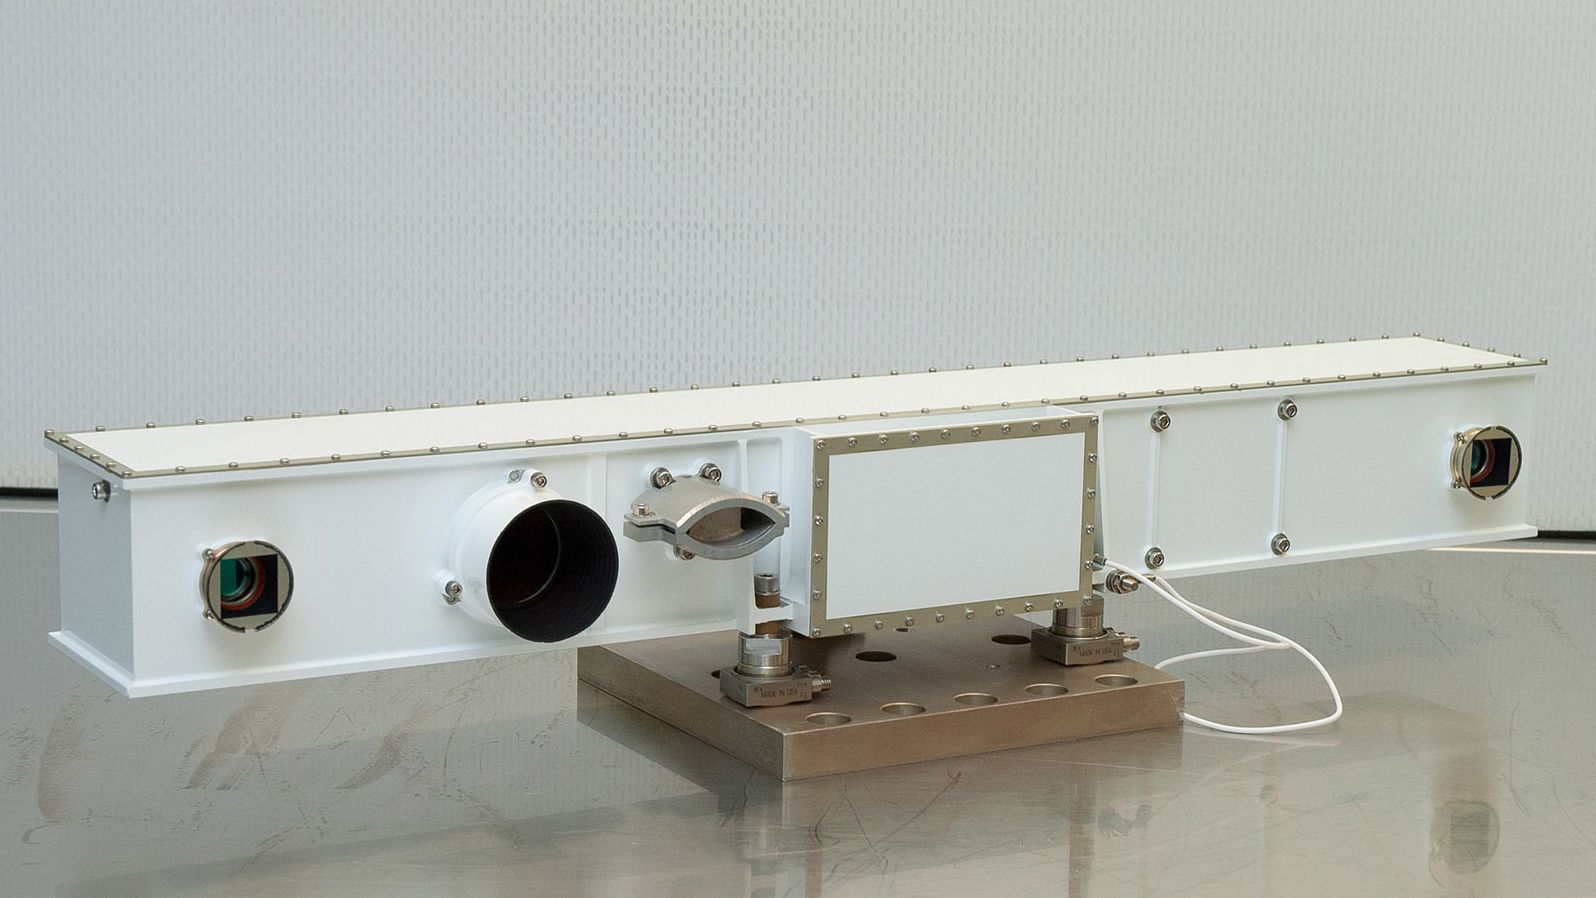 The PanCam. The system that could help discover life on Mars.